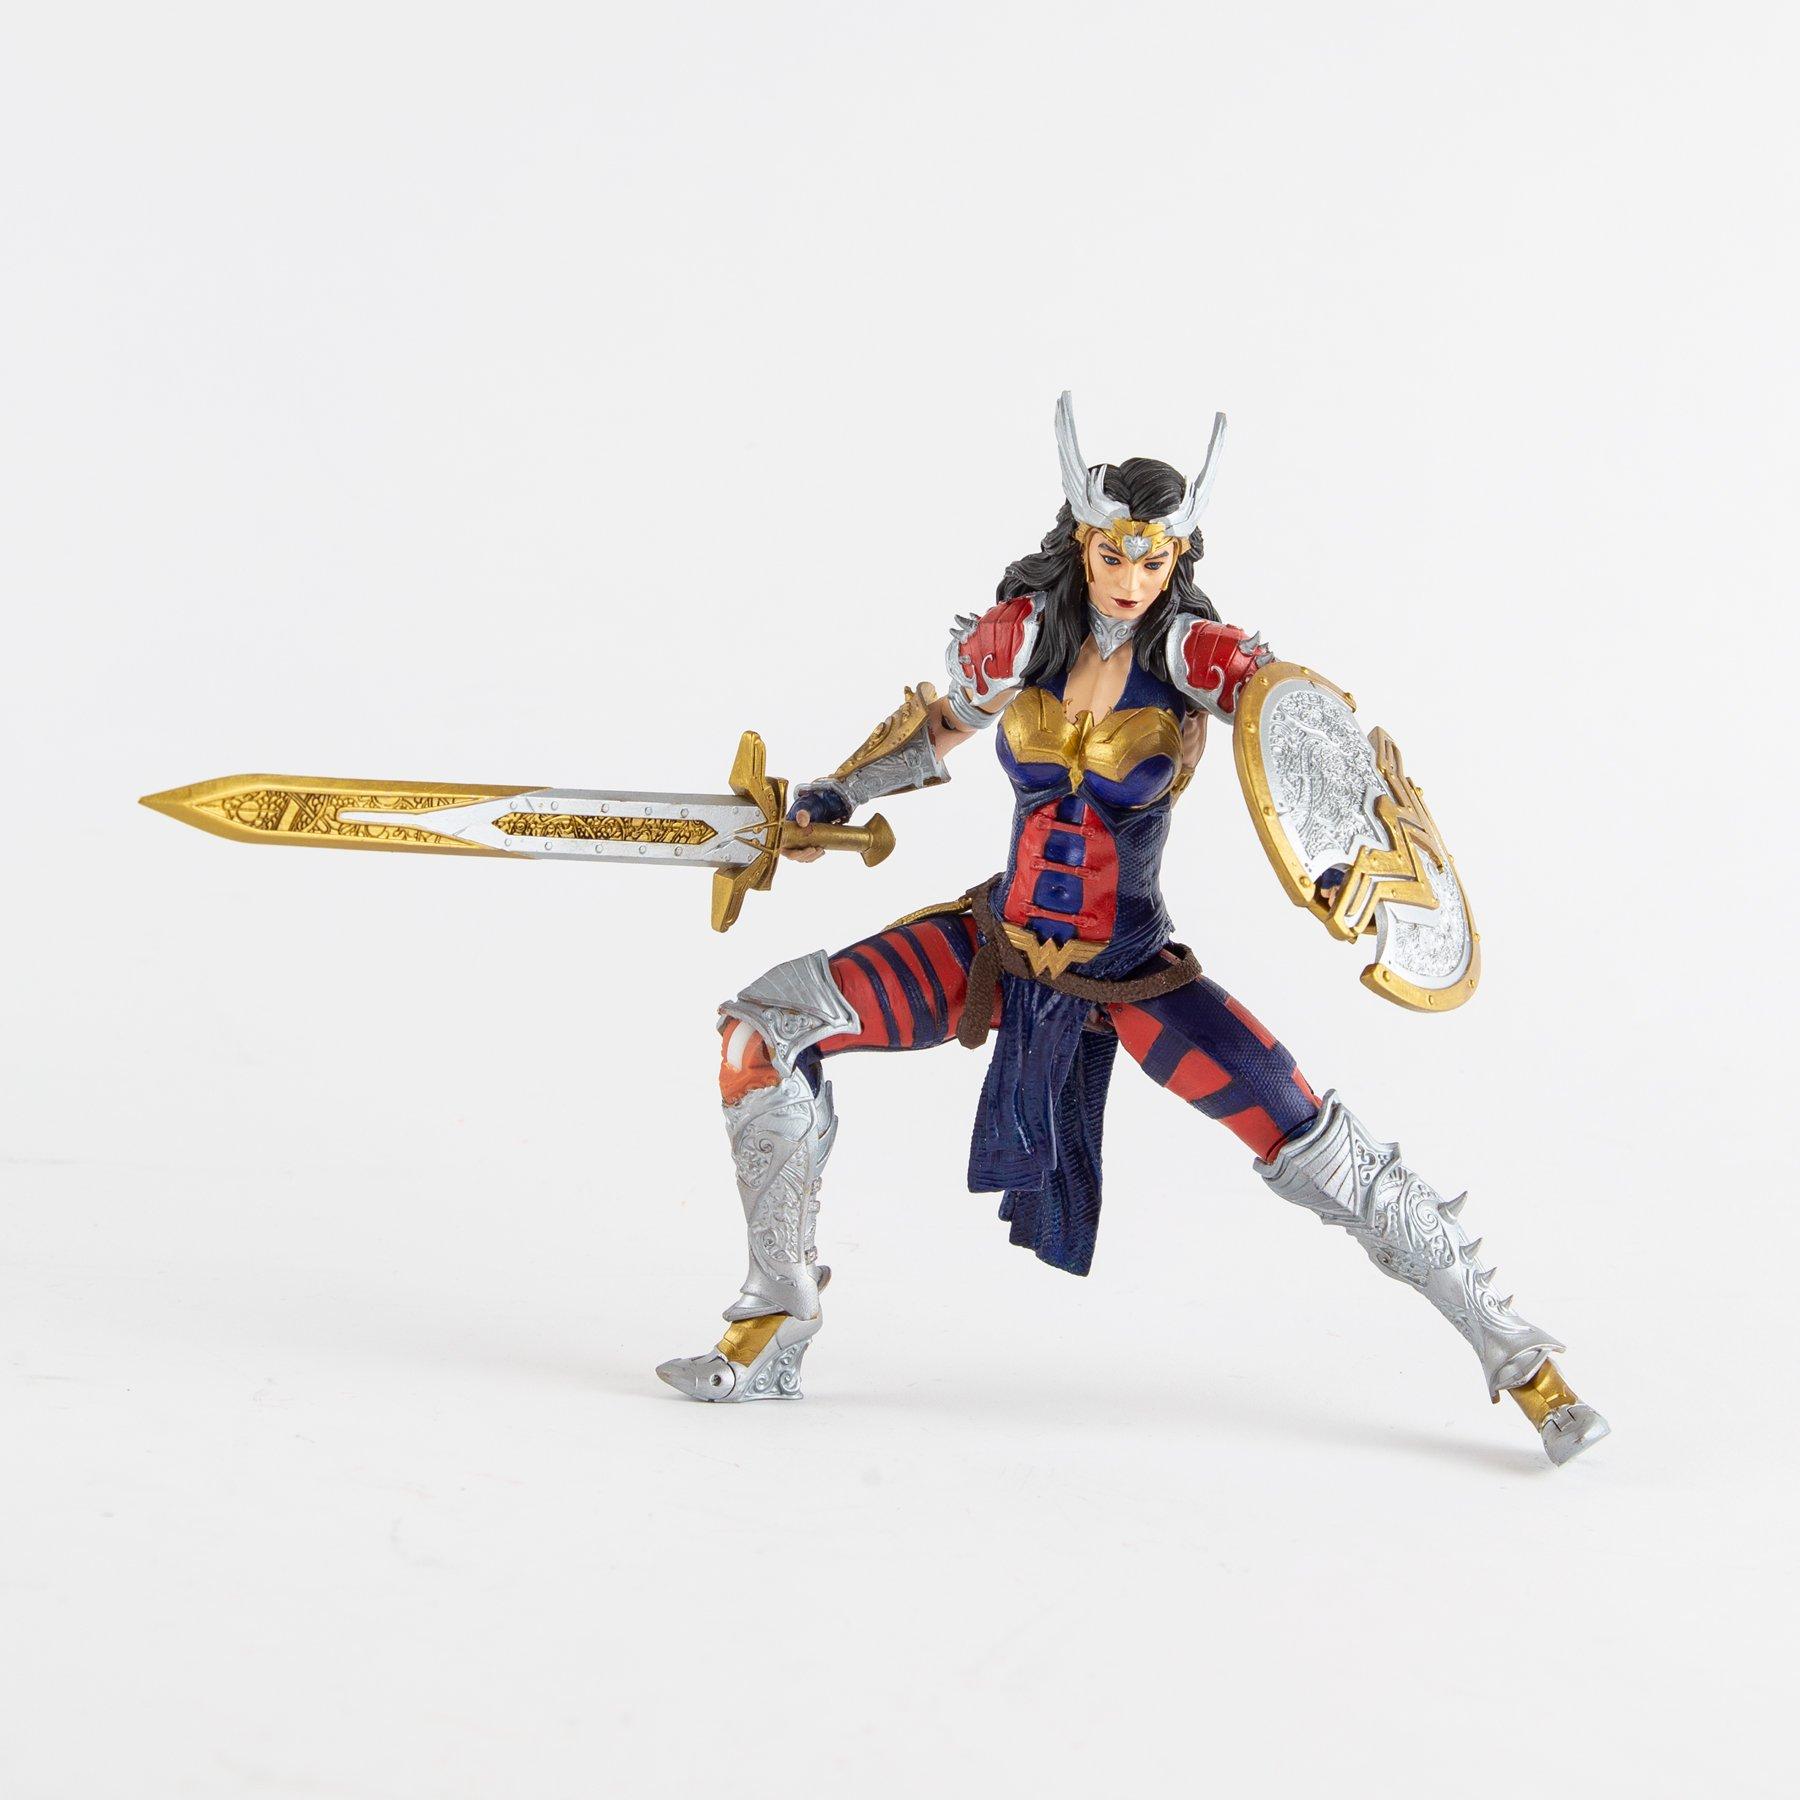 15123-7 for sale online McFarlane Toys Wonder Woman 7 inch Action Figure 